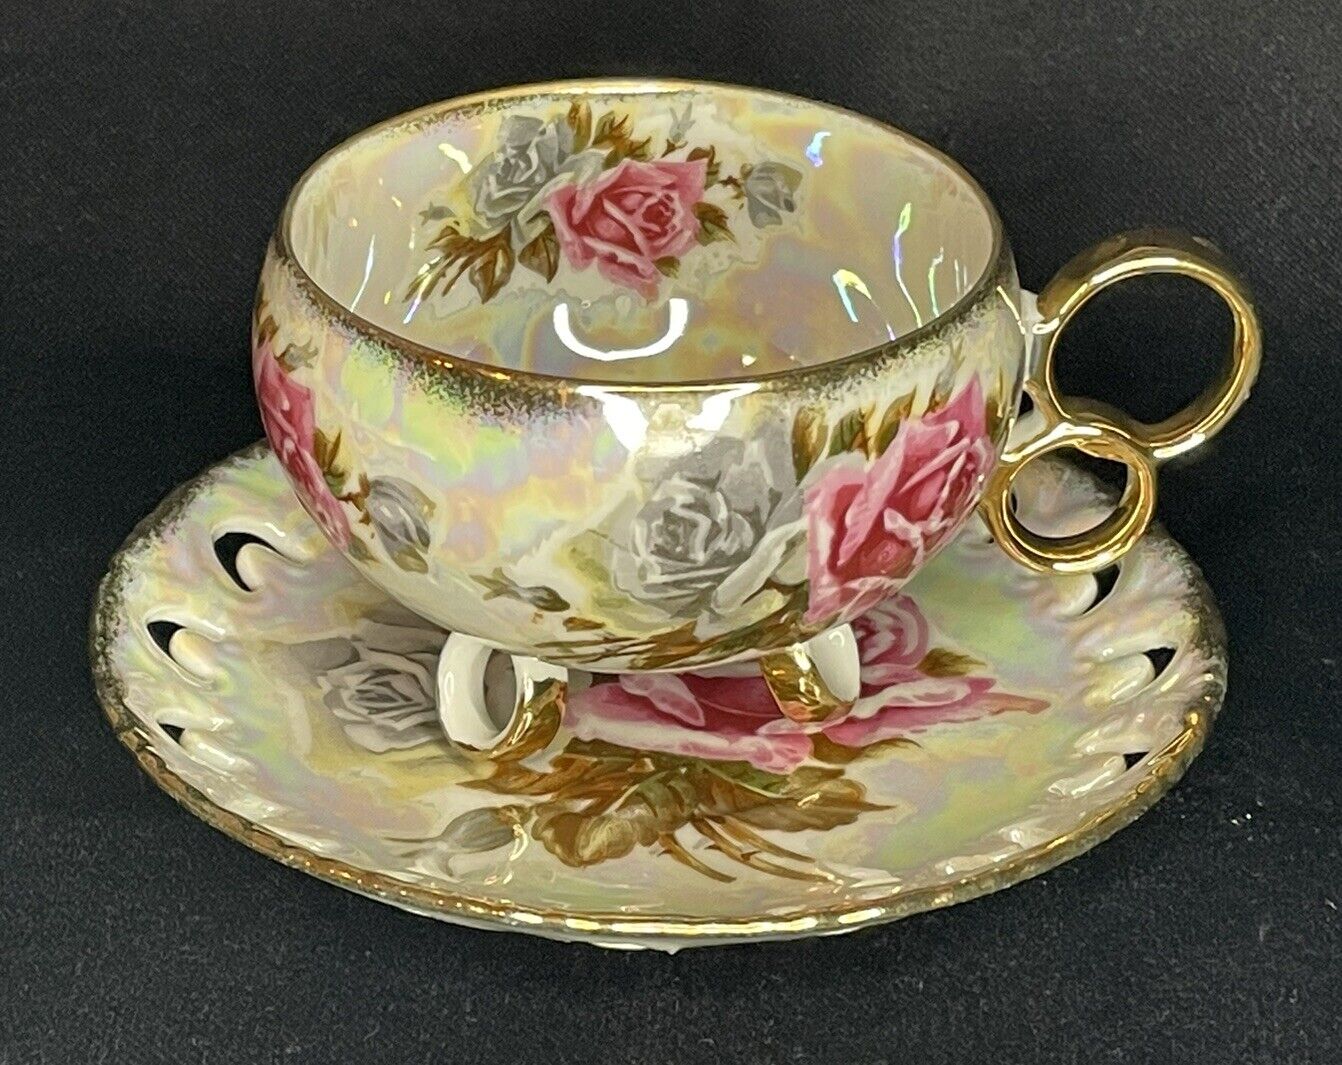 Vintage ROYAL SEALY China Reticulated Lustreware Roses Tea Cup and Saucer Set